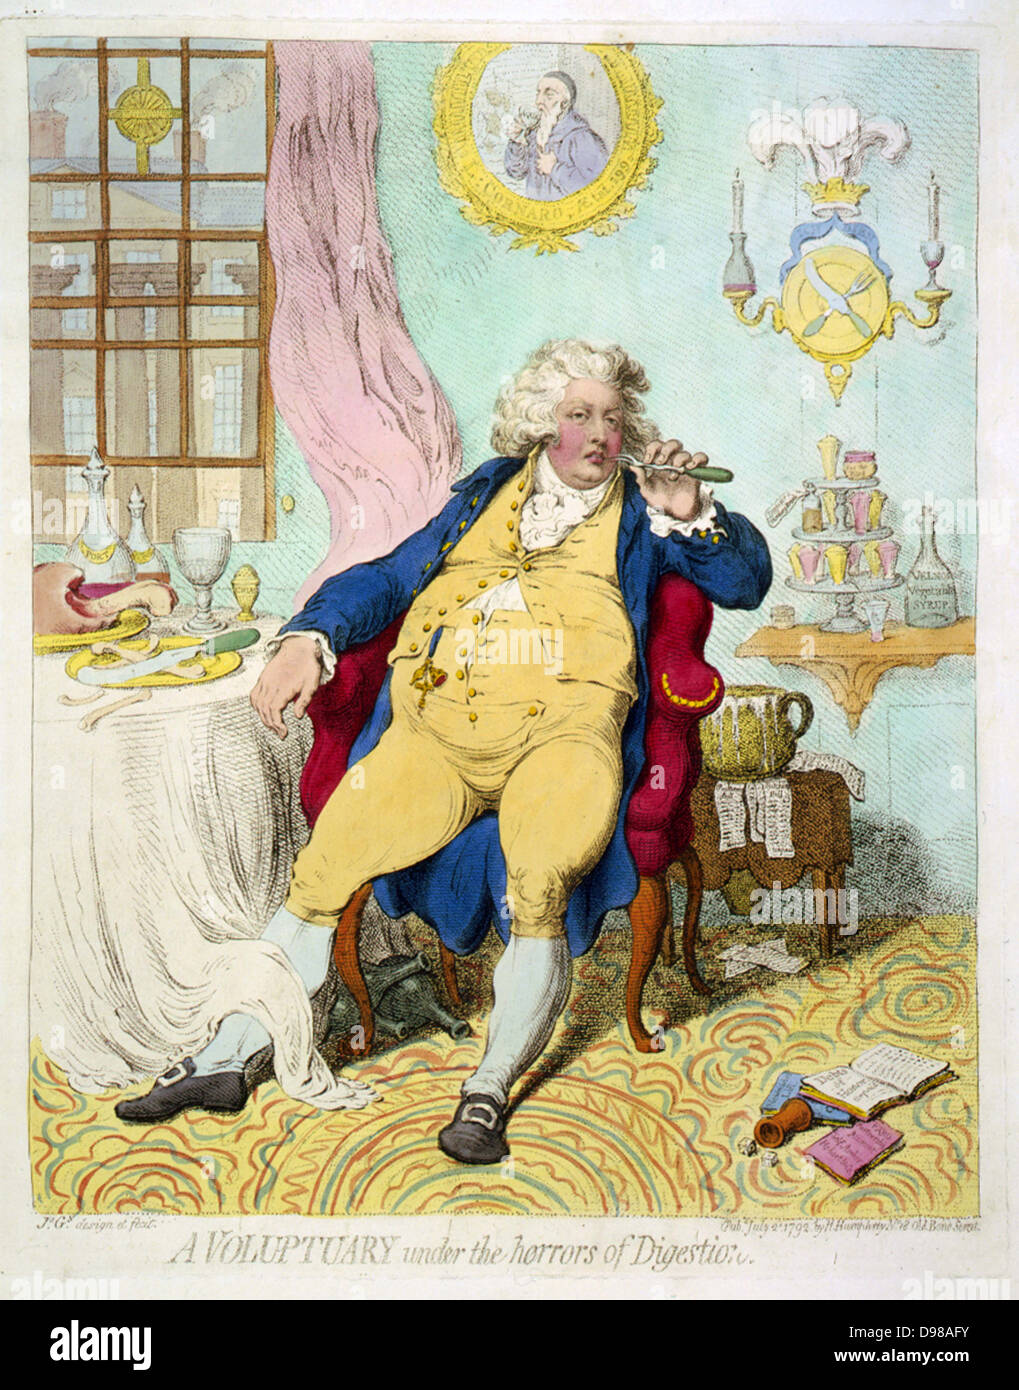 A Voluptuary under the horrors of digestion' George IV ( Prince Regent 1811-1820) when Prince of Wales, showing his extravagance, grossness and self-indulgence. Cartoon by James Gilray (1756-1815) published London 1792. Stock Photo